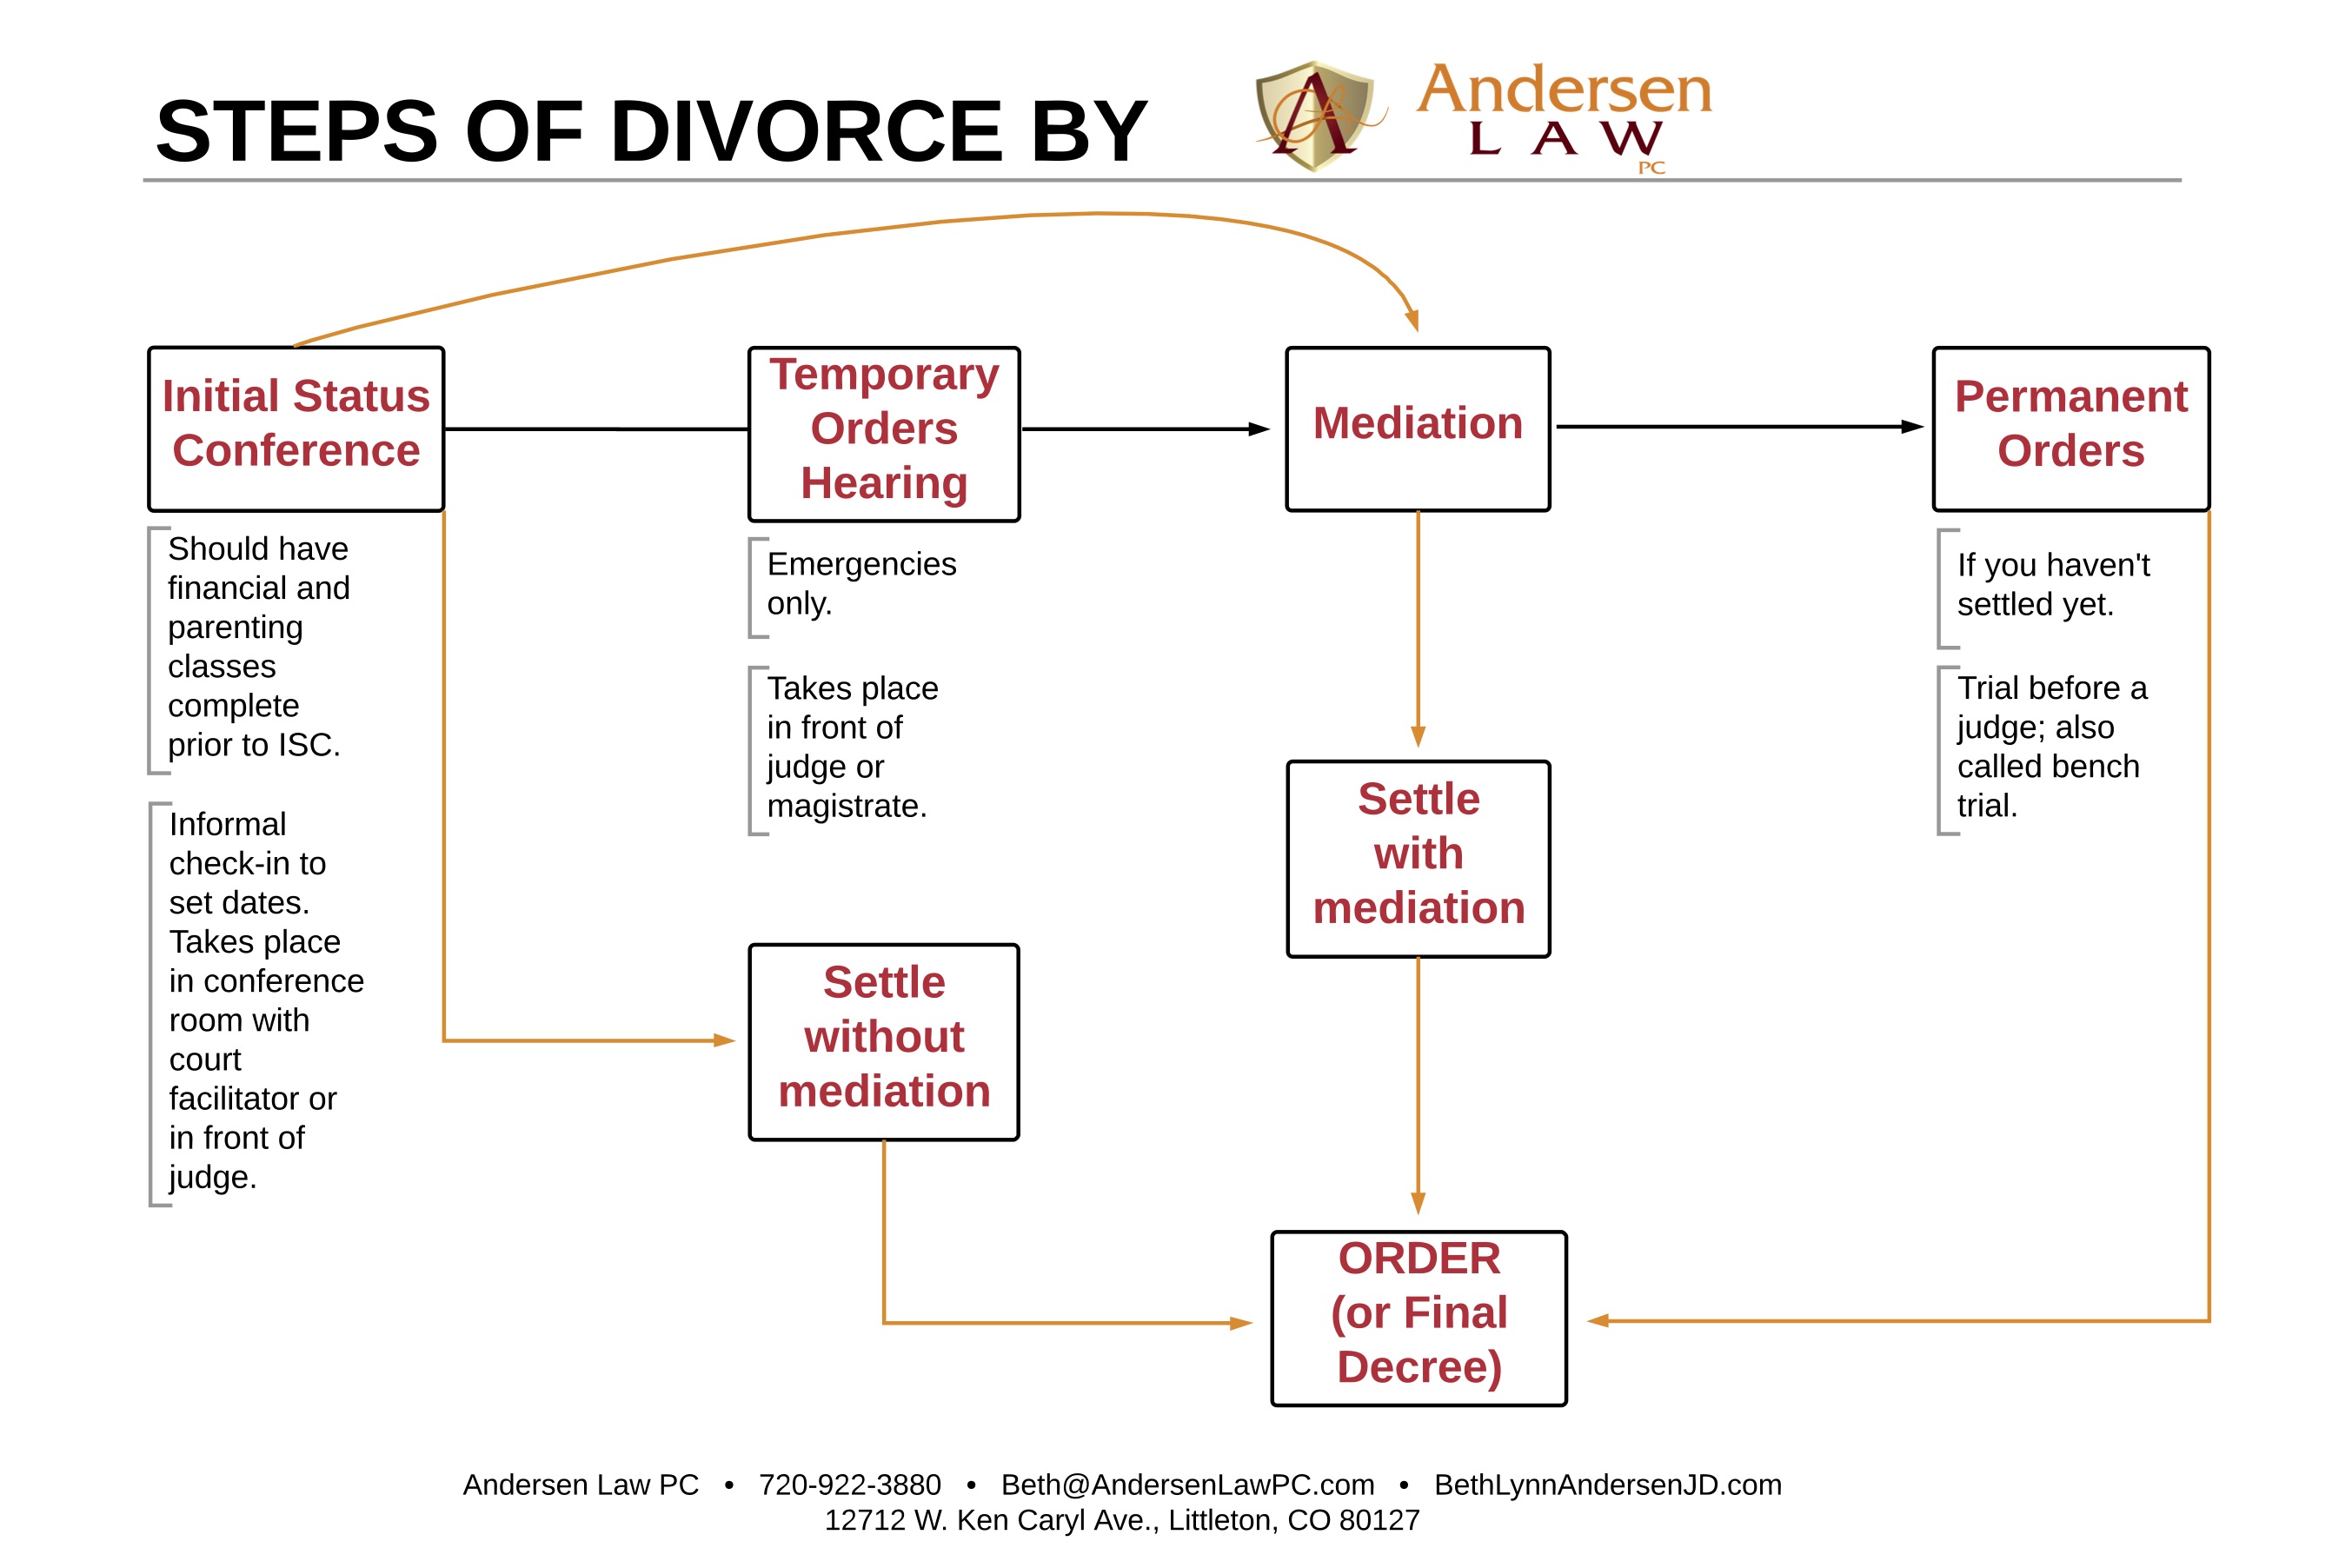 download-our-new-easy-to-follow-steps-of-divorce-chart-andersen-law-pc